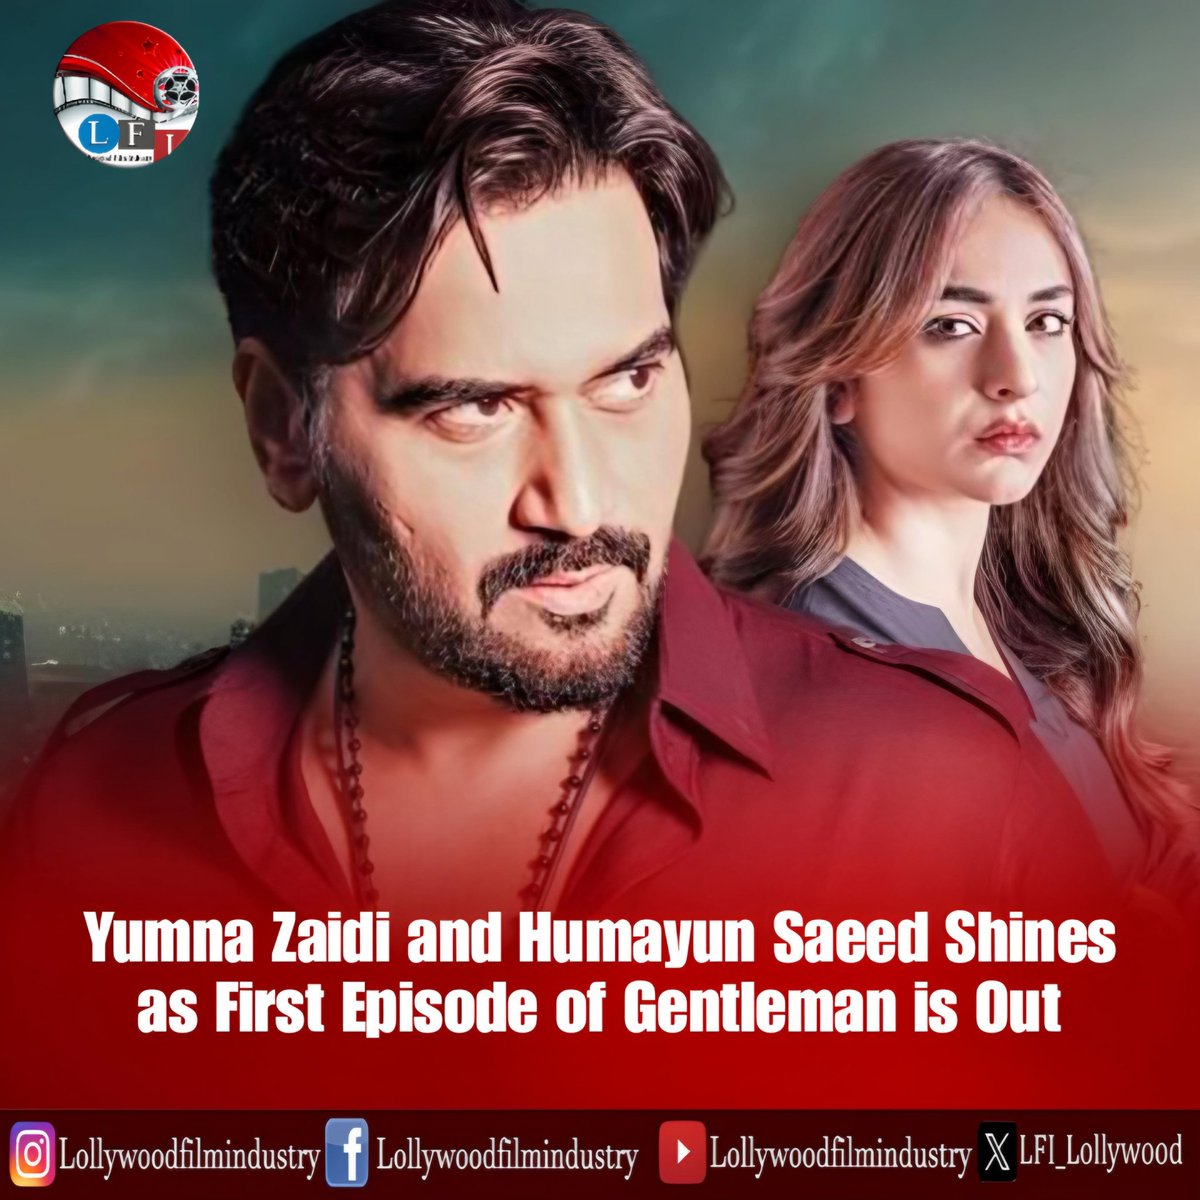 The Much Anticipated Drama Serial of the year Gentleman Finally Aired on Tv And as Expected first Episode living upto Expectation, Yumna Zaidi and Humayun Saeed's Stellar Performance set the tone for the Show. #gentleman #yumnazaidi #humayusaeed #zahidahmad #sohaialiabro